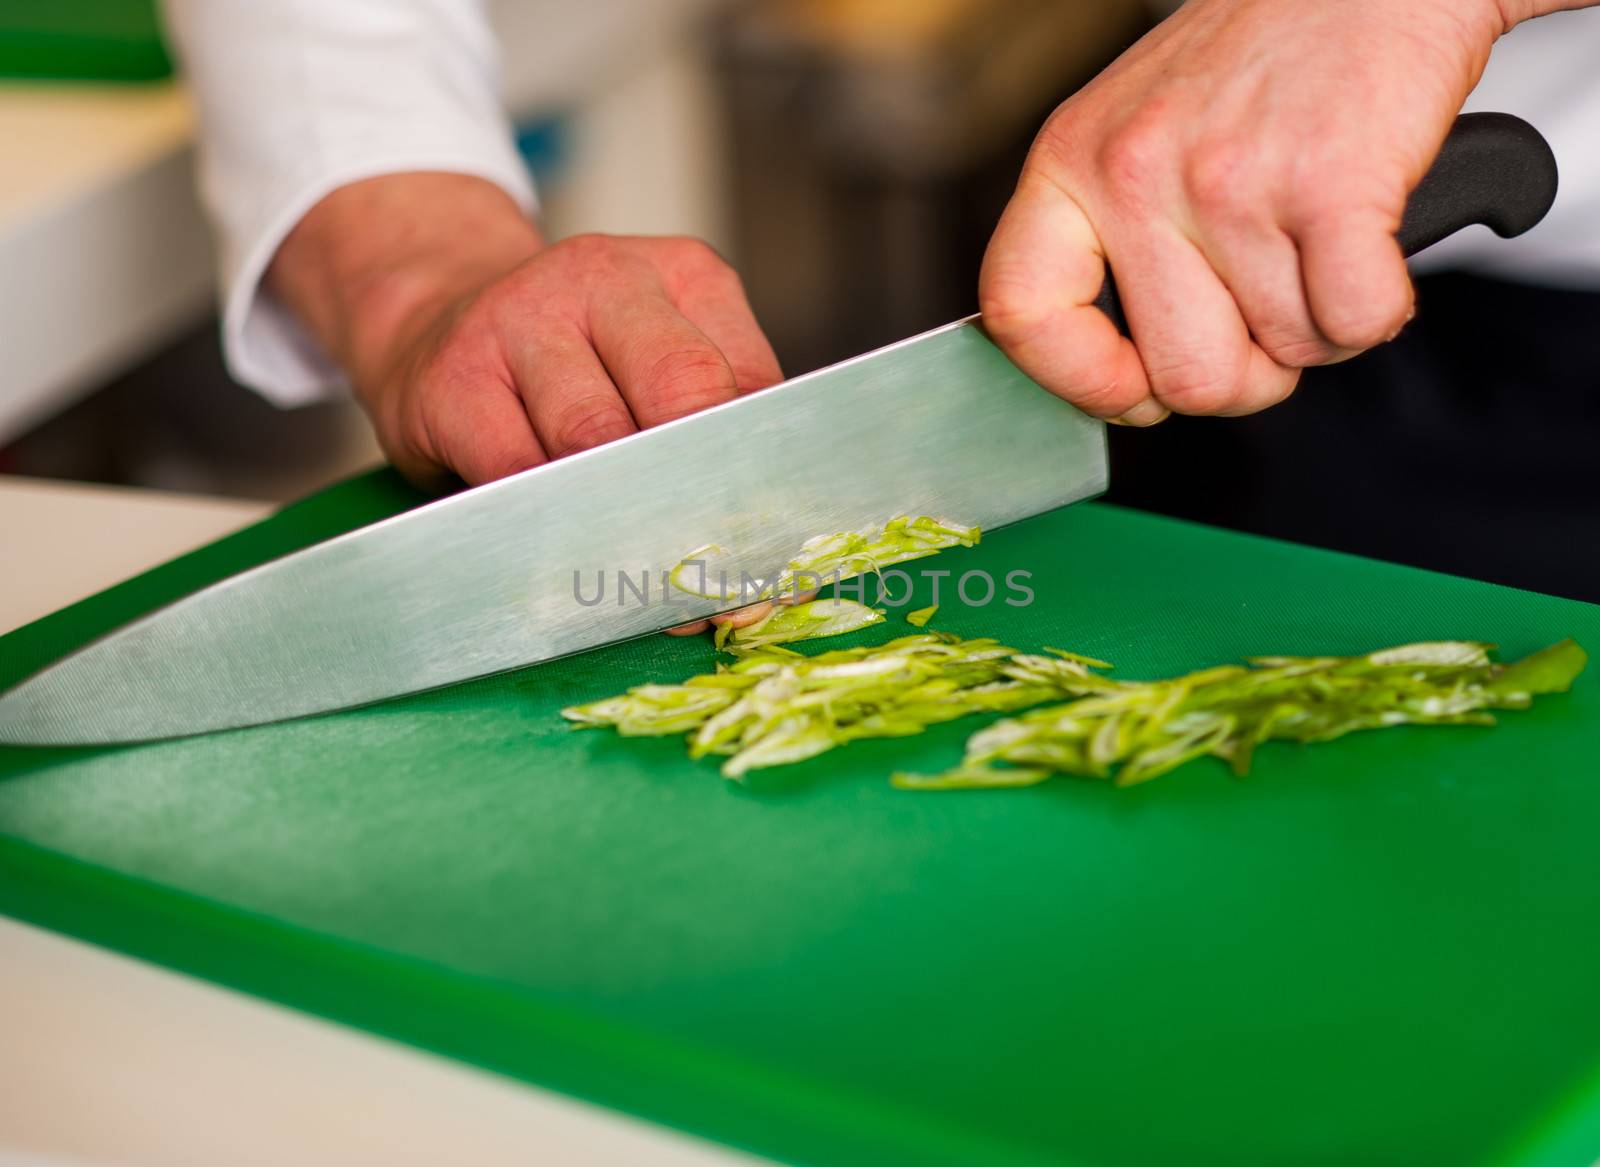 Chef chopping leek and doing preparations by stockyimages